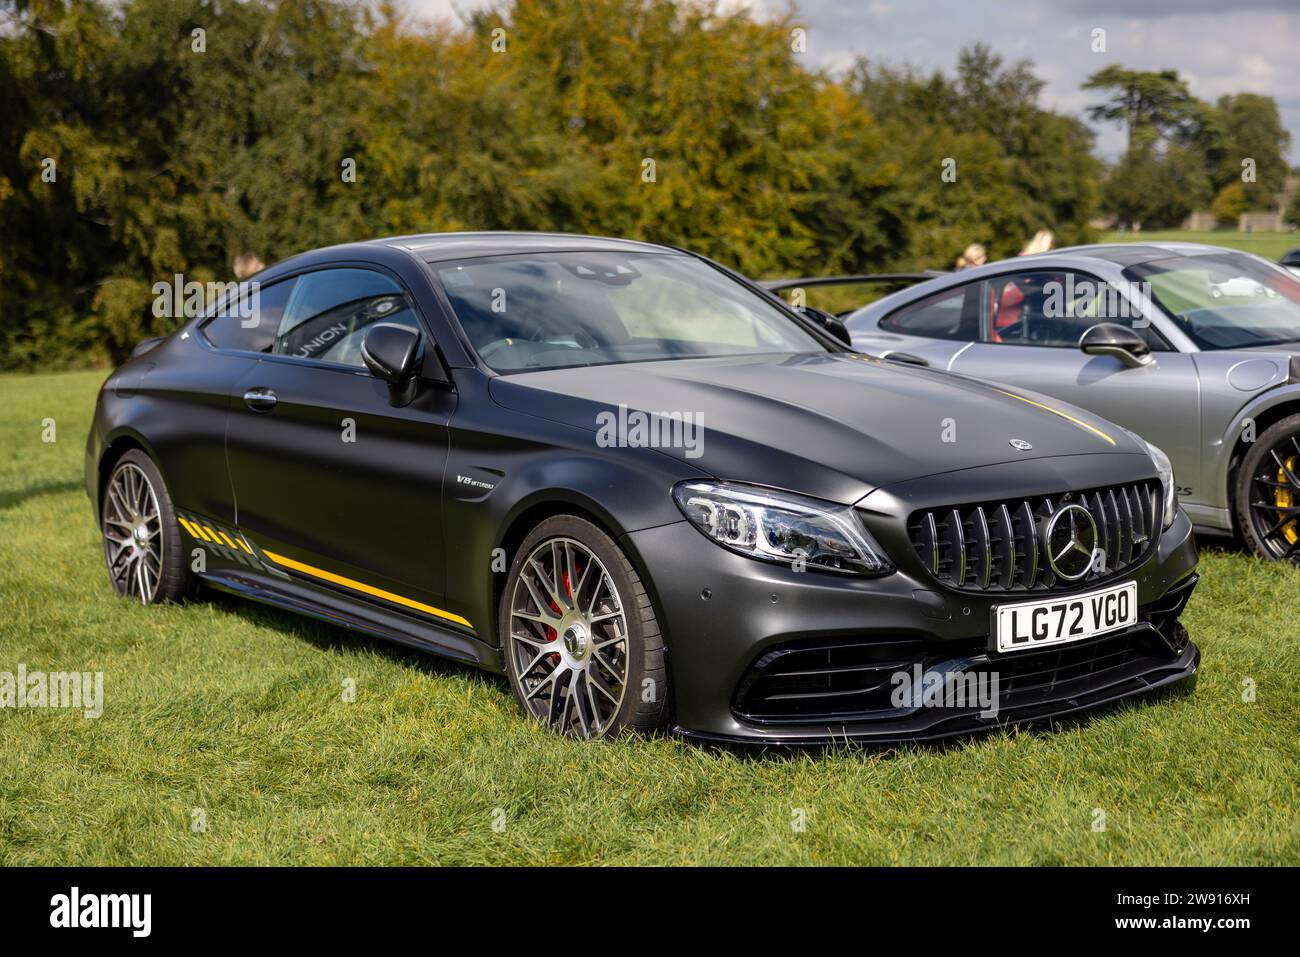 Mercedes-AMG C 63 S Final Edition Coupe, in mostra al Salone privato Concours d'Elégance che si tiene a Blenheim Palace. Foto Stock